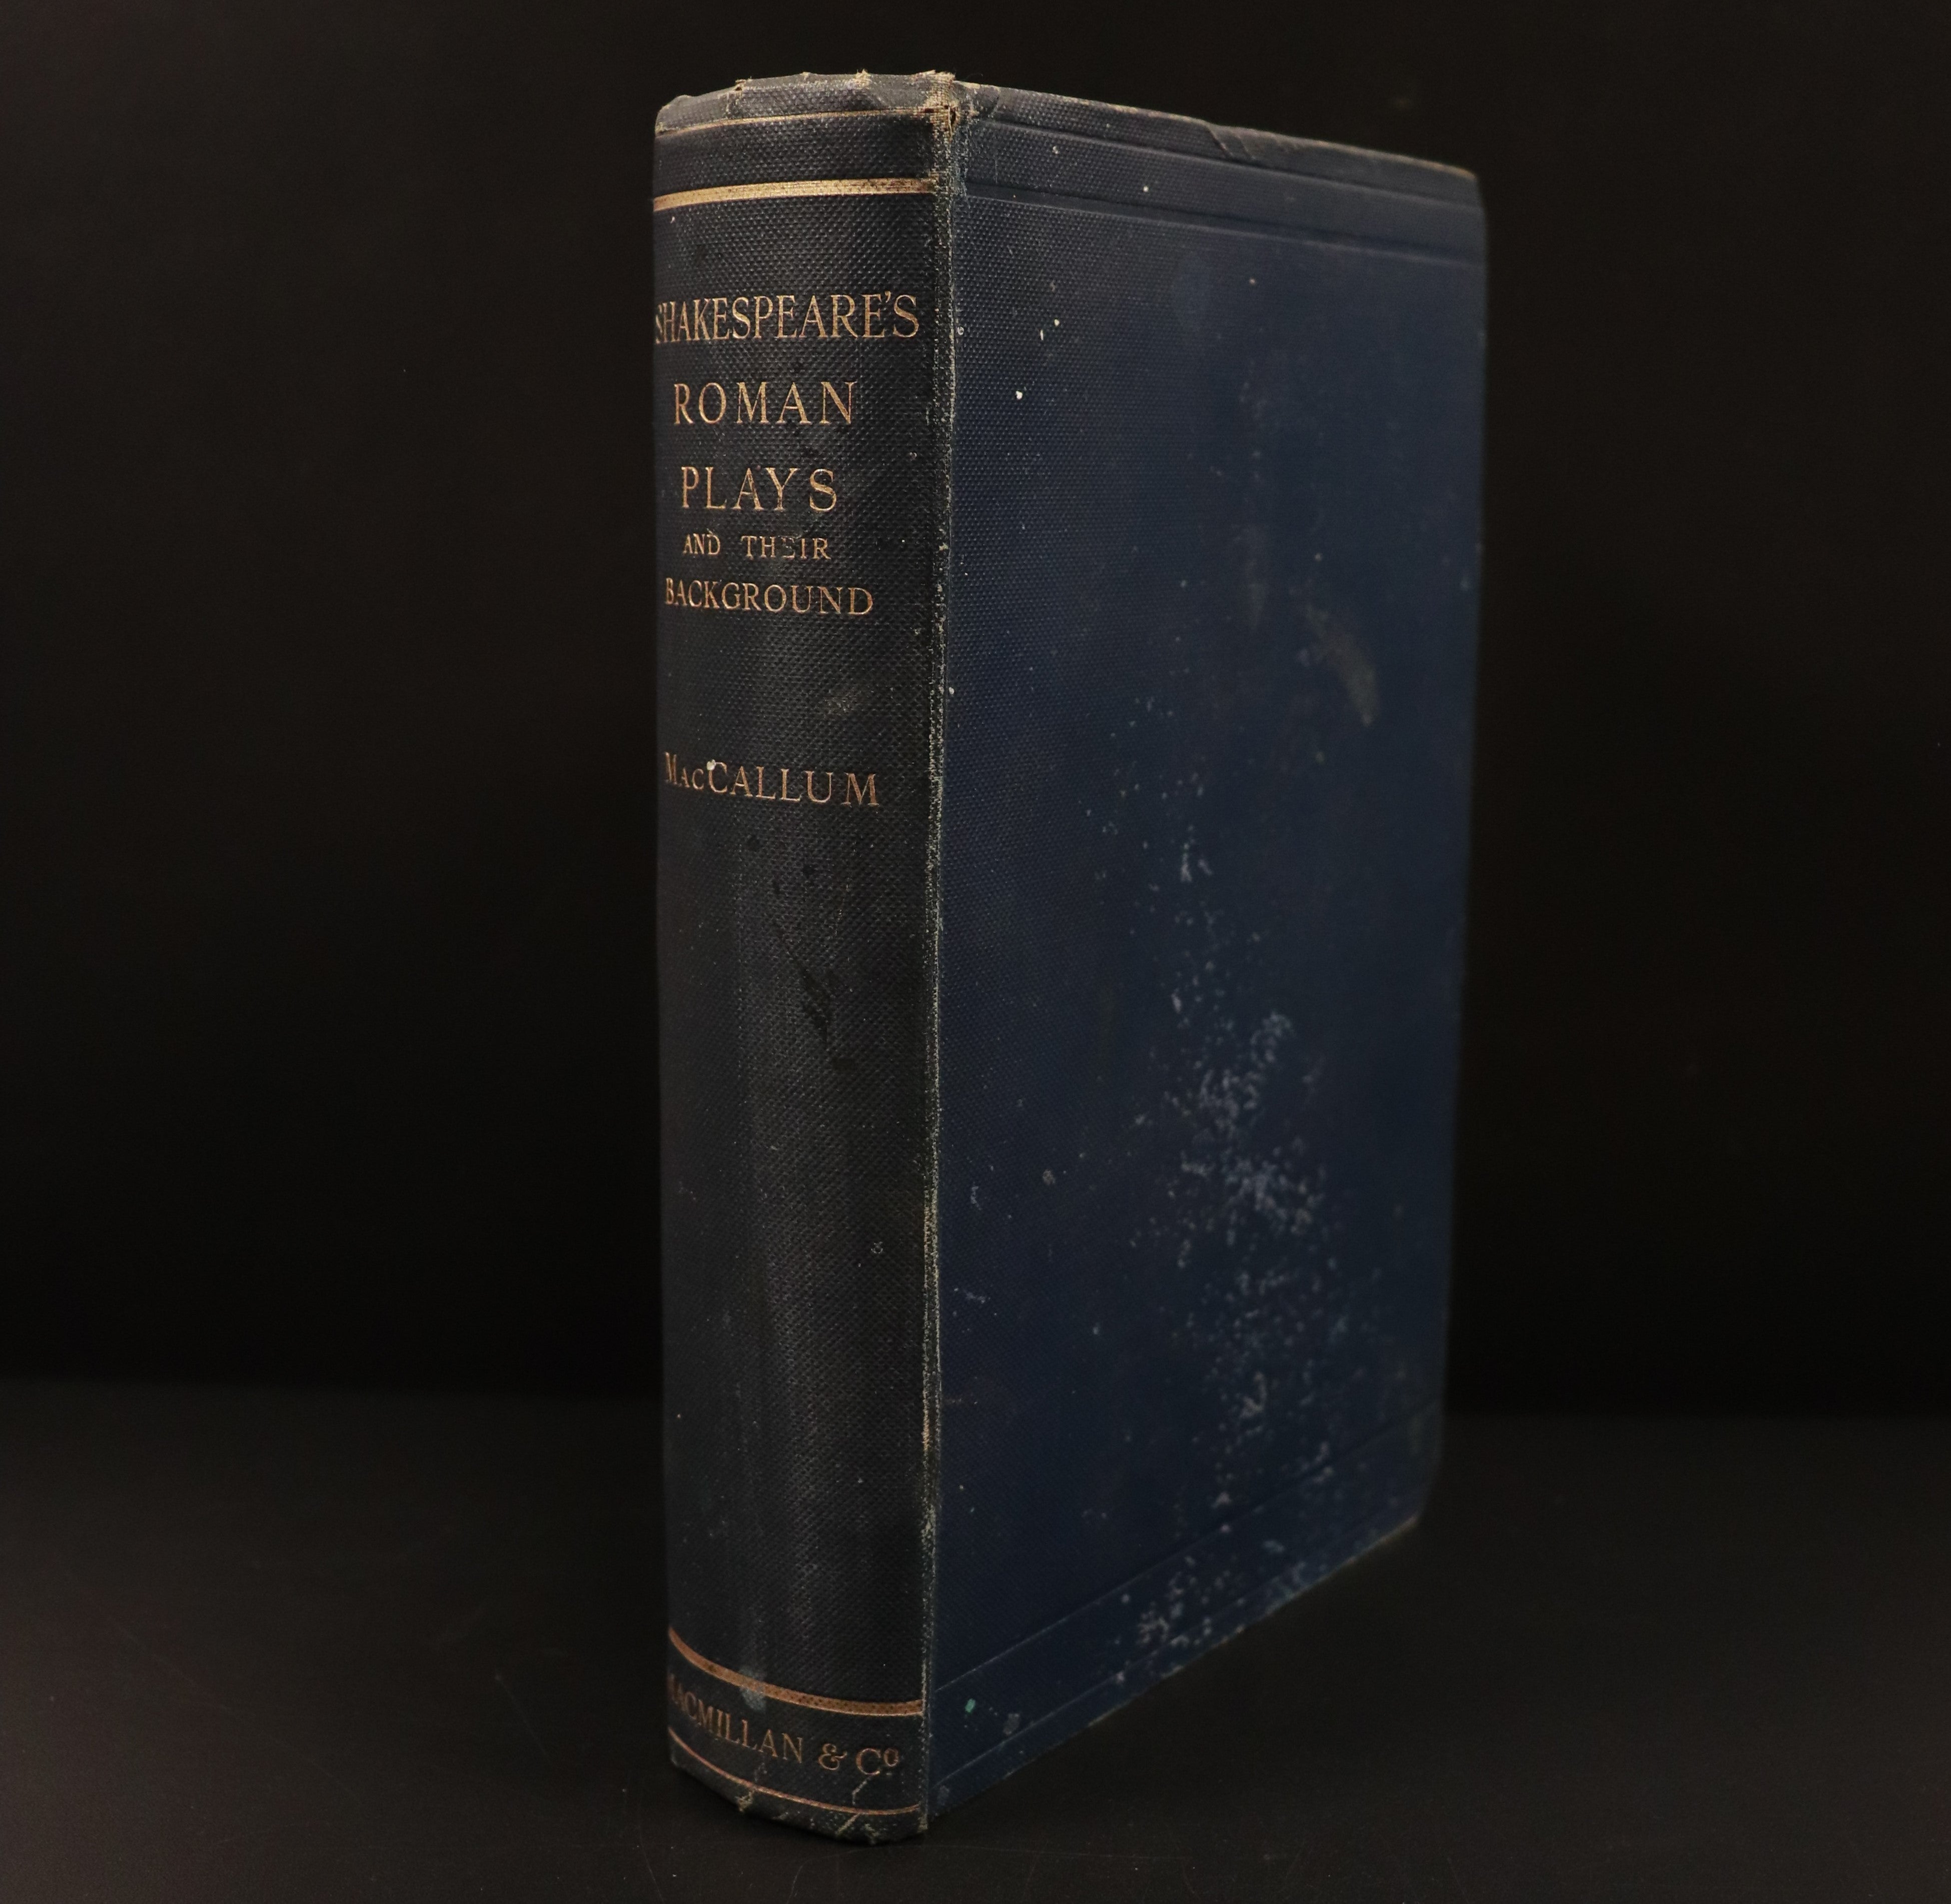 1910 Shakespeare's Roman Plays & Their Background by M. MacCallum Antique Book